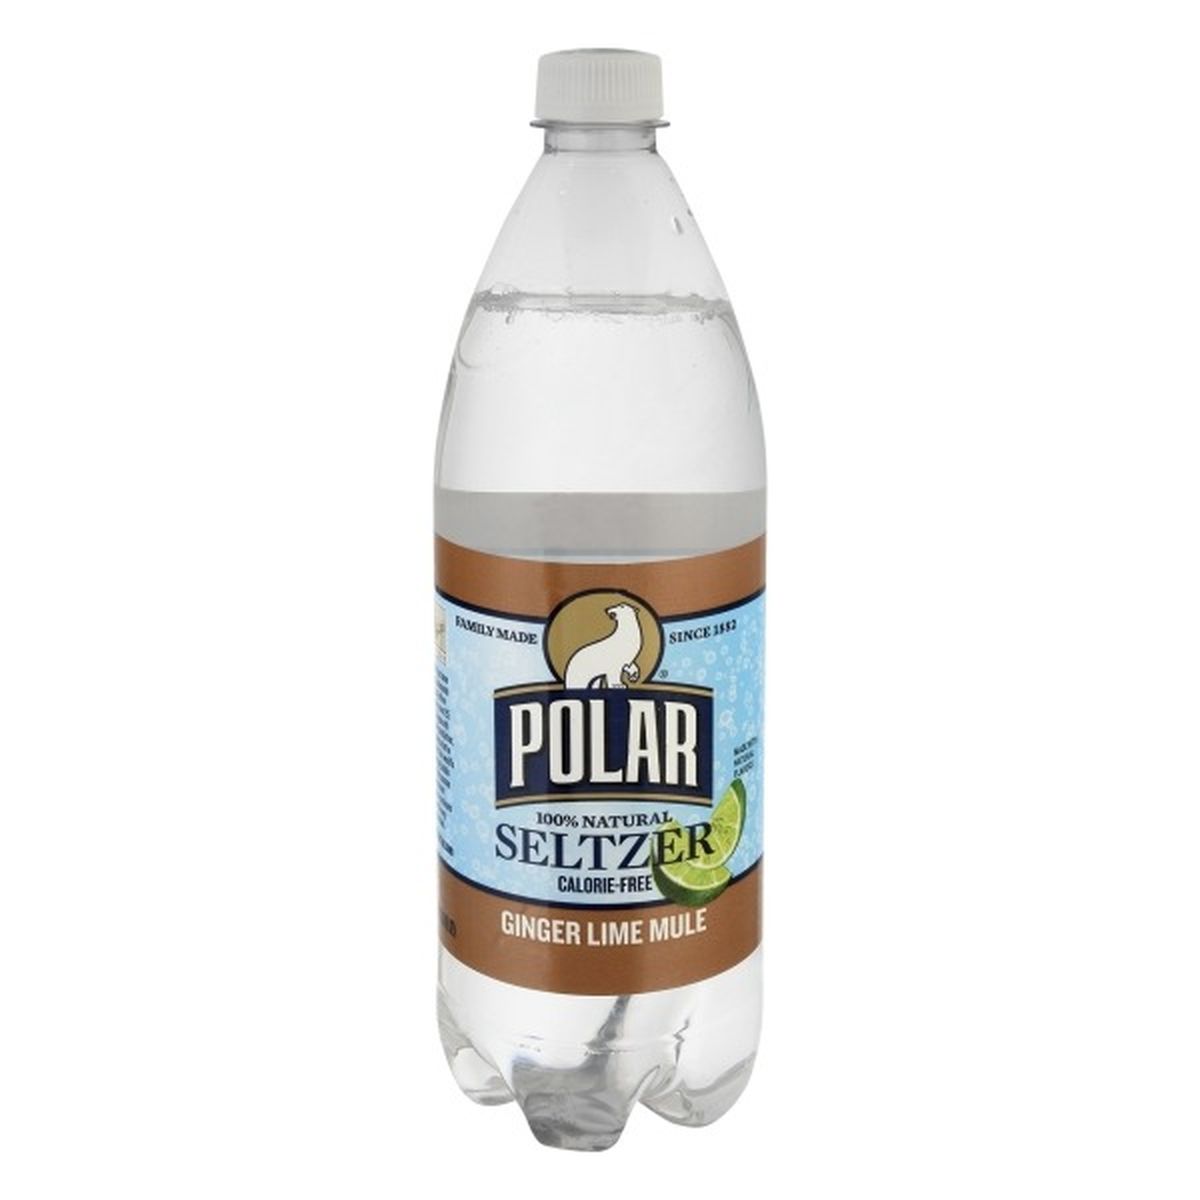 Calories in Polar Seltzer, 100% Natural, Ginger Lime Mule